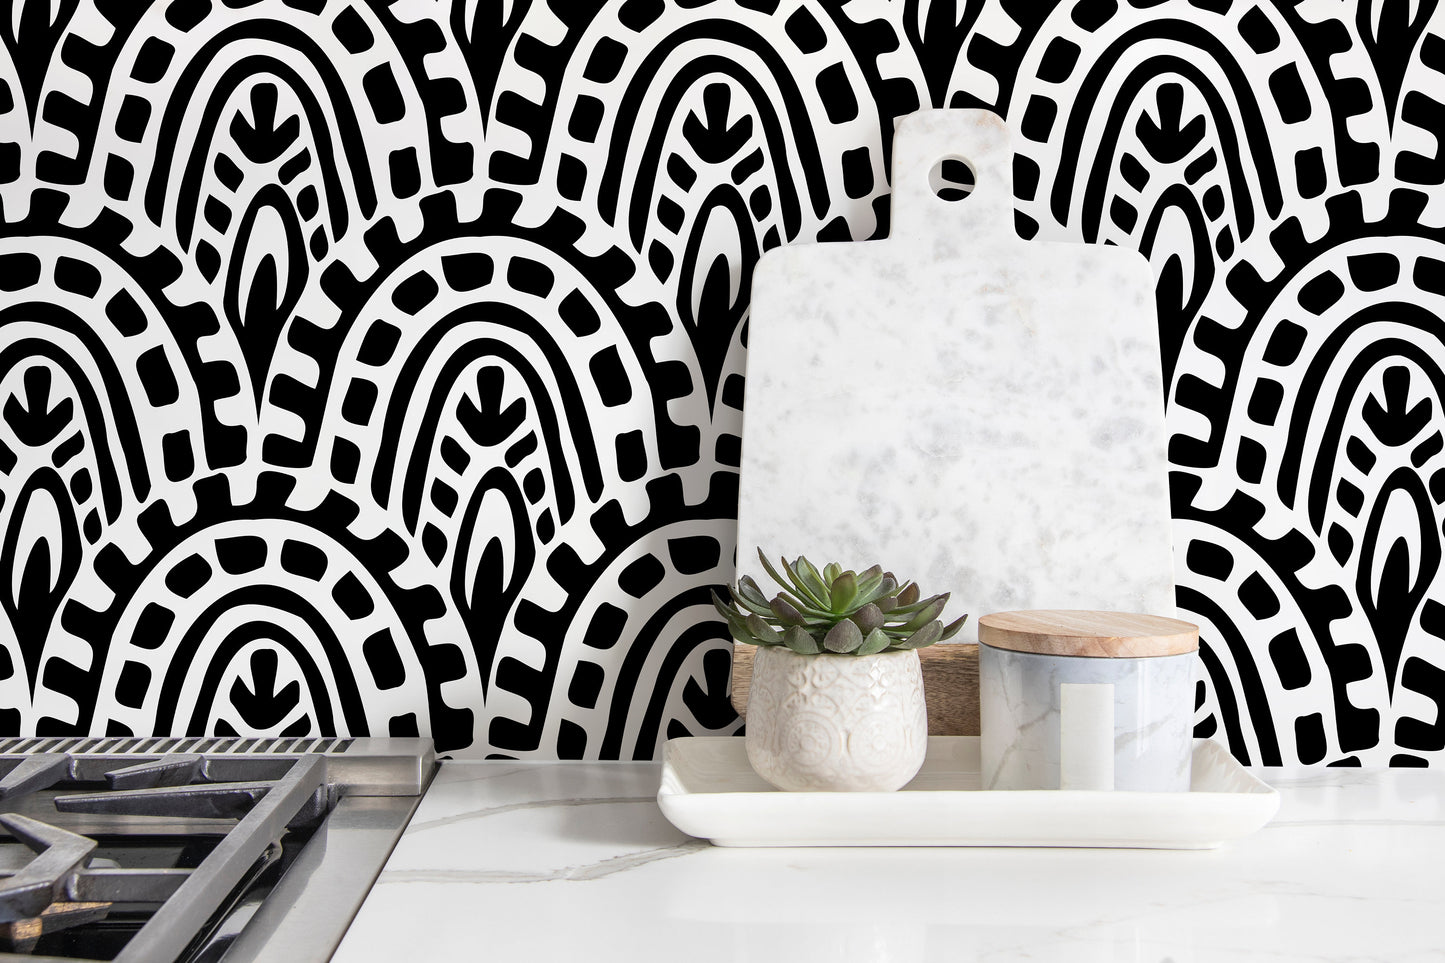 Black and White Abstract Wallpaper / Peel and Stick Wallpaper Removable Wallpaper Home Decor Wall Art Wall Decor Room Decor - D352